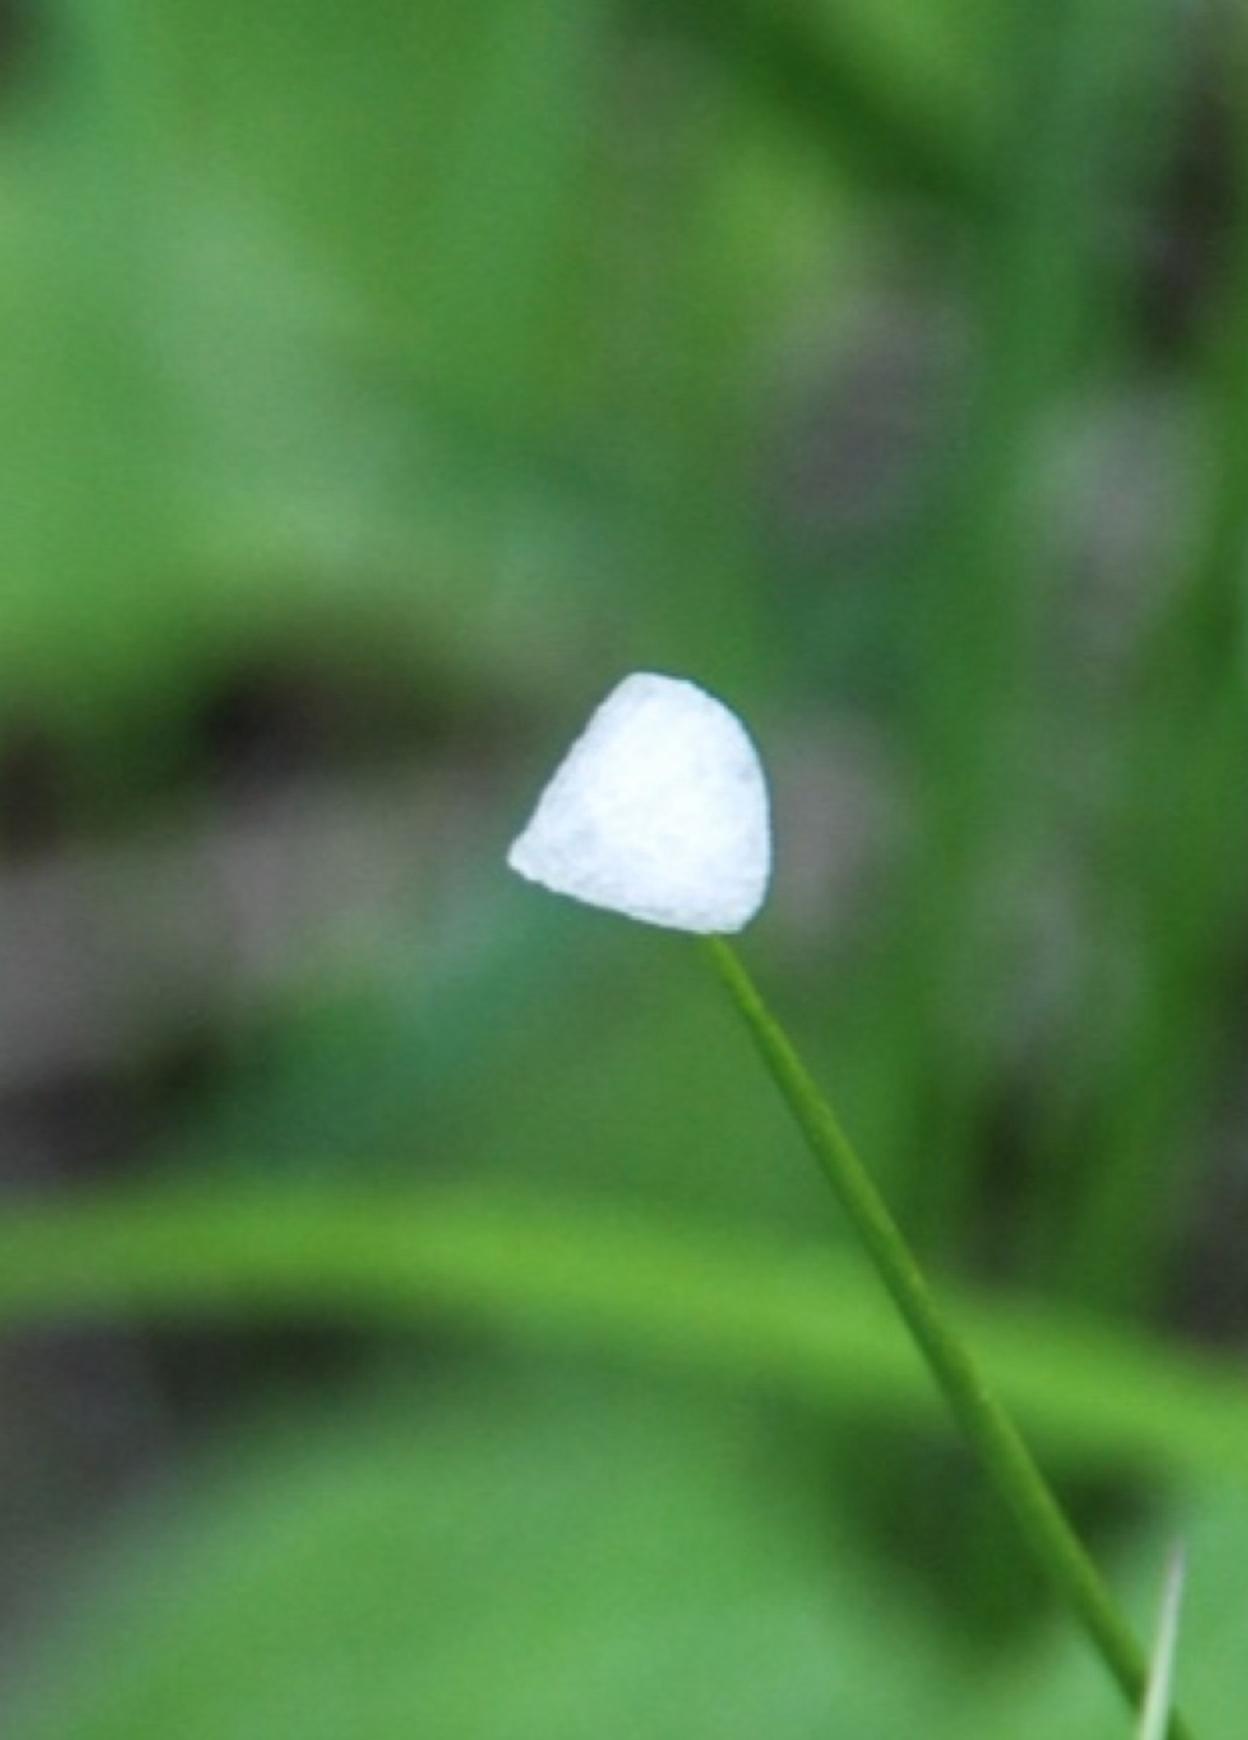 Conical graupel pellet on grass blade. Photo by Susan Marsh